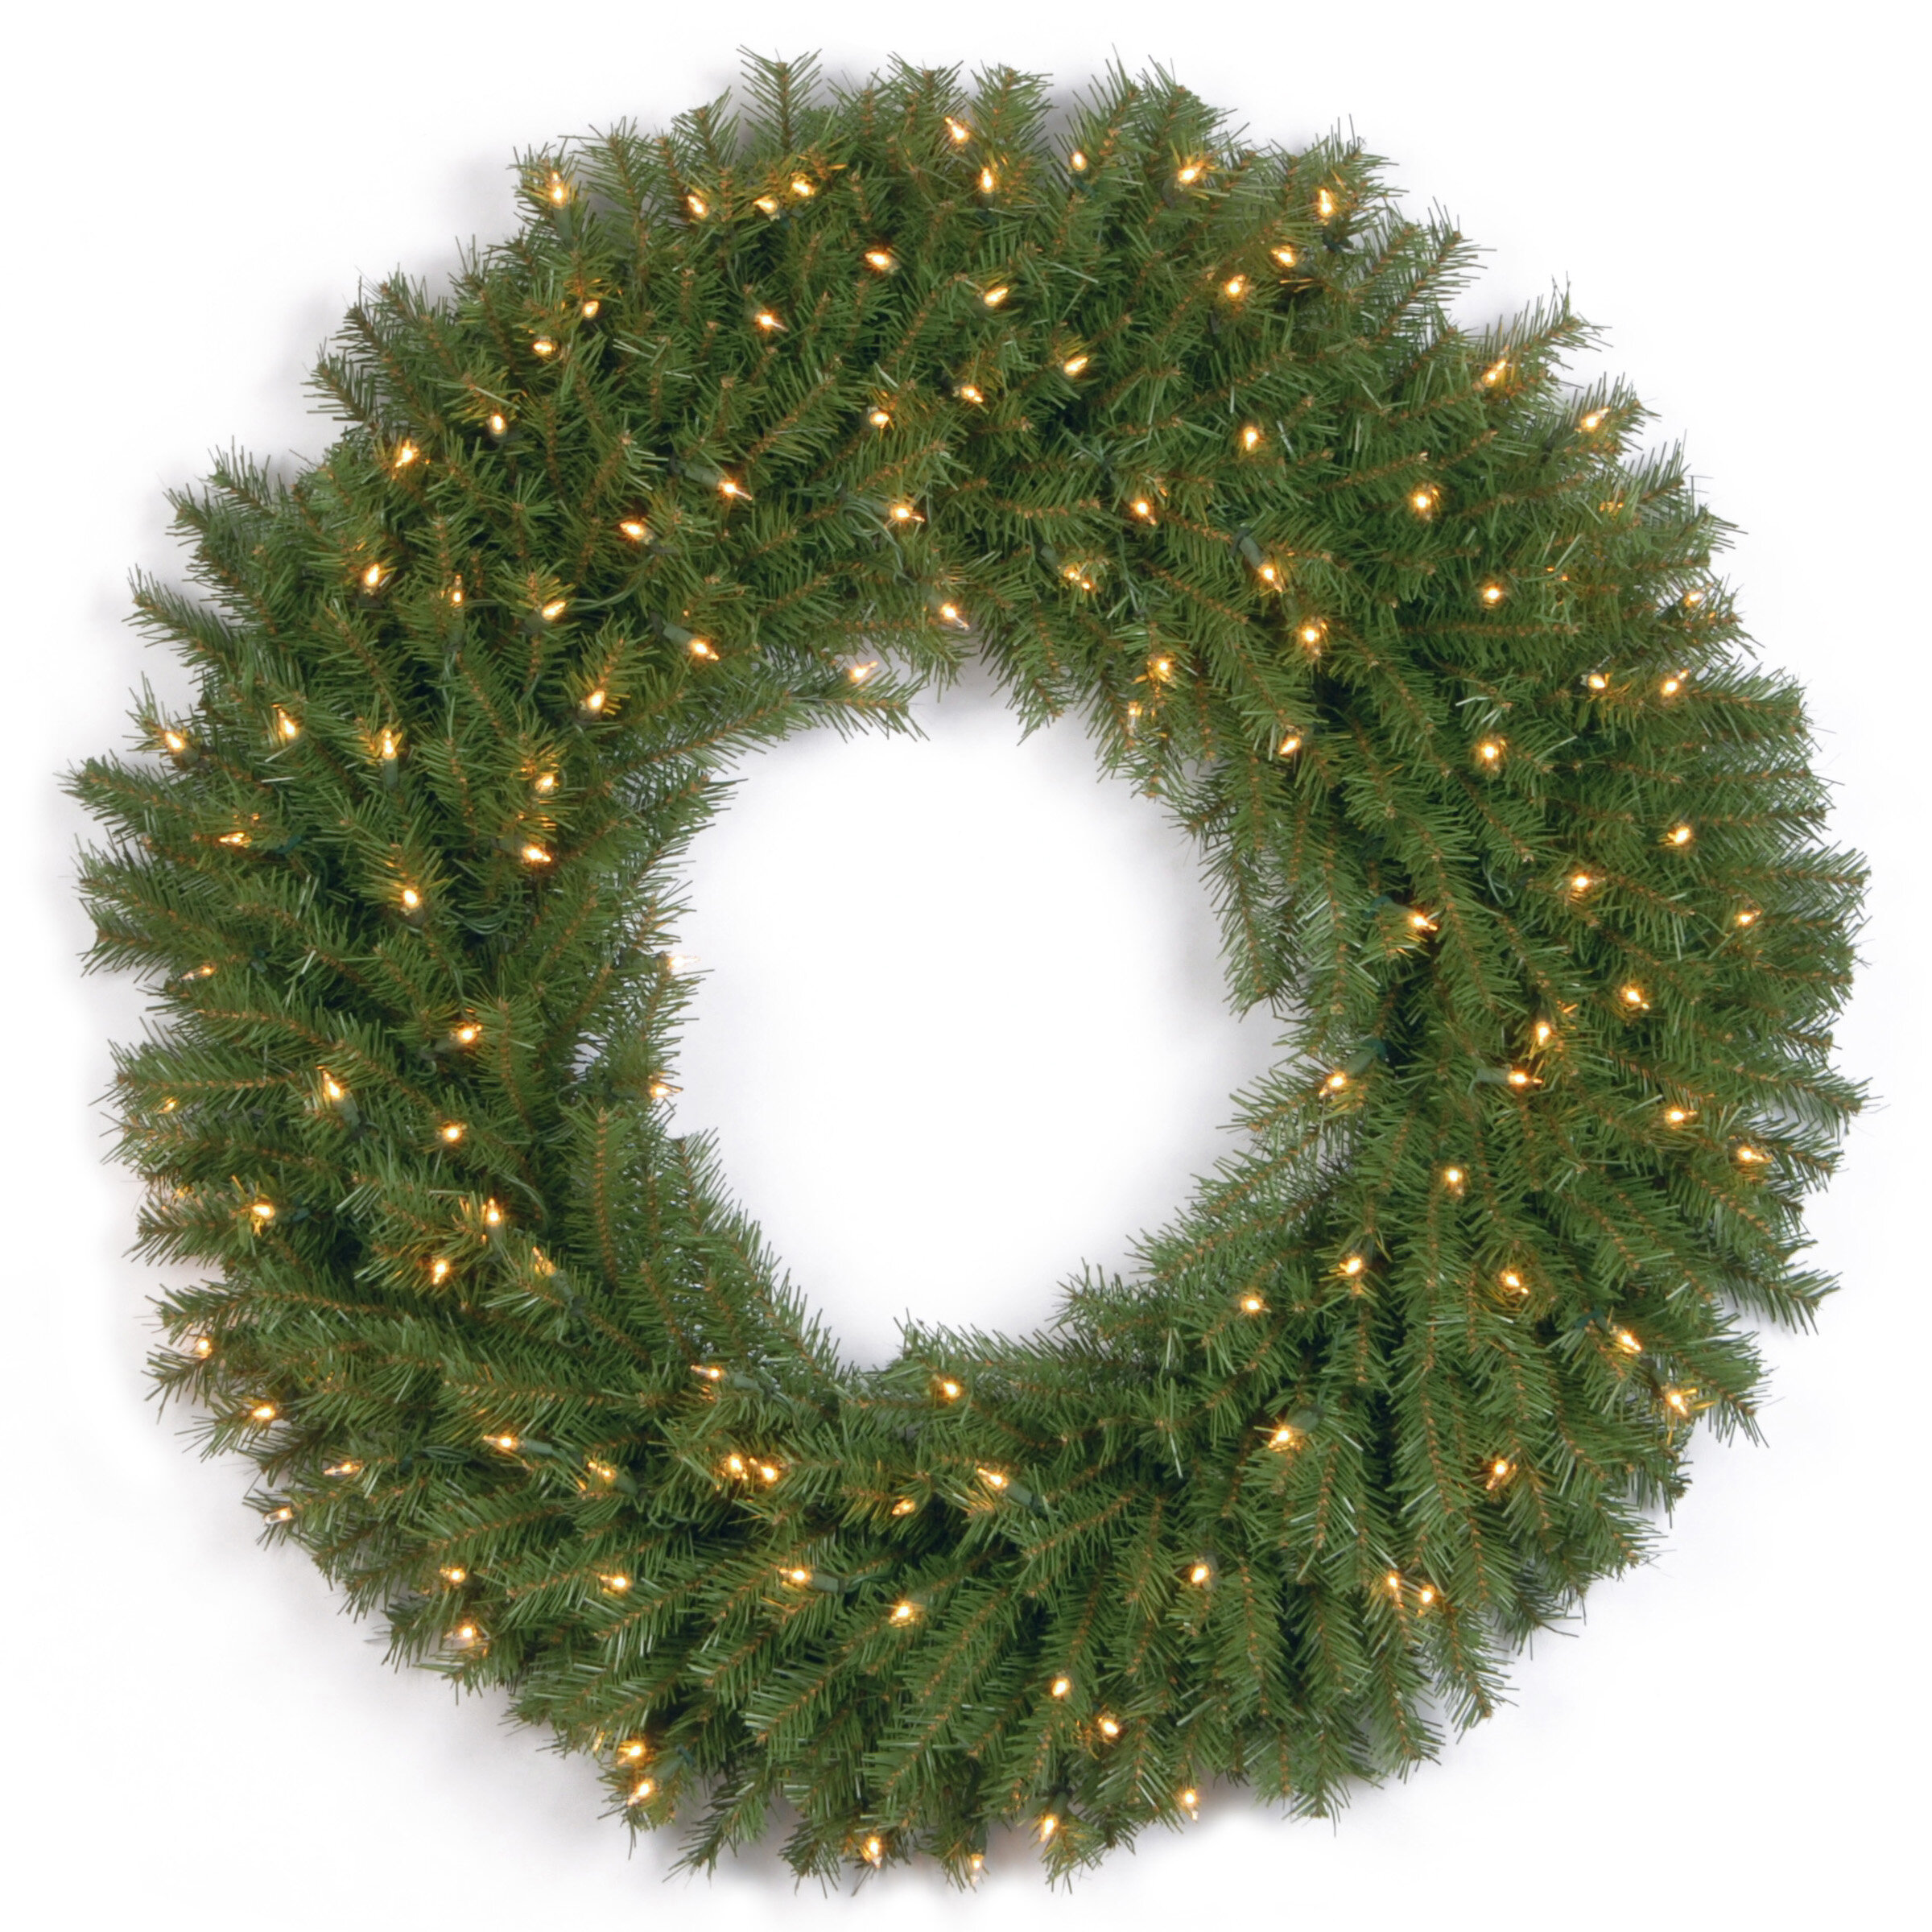 Add Dec With LED Battery Operated lights Large Green Craft Christmas Wreath 